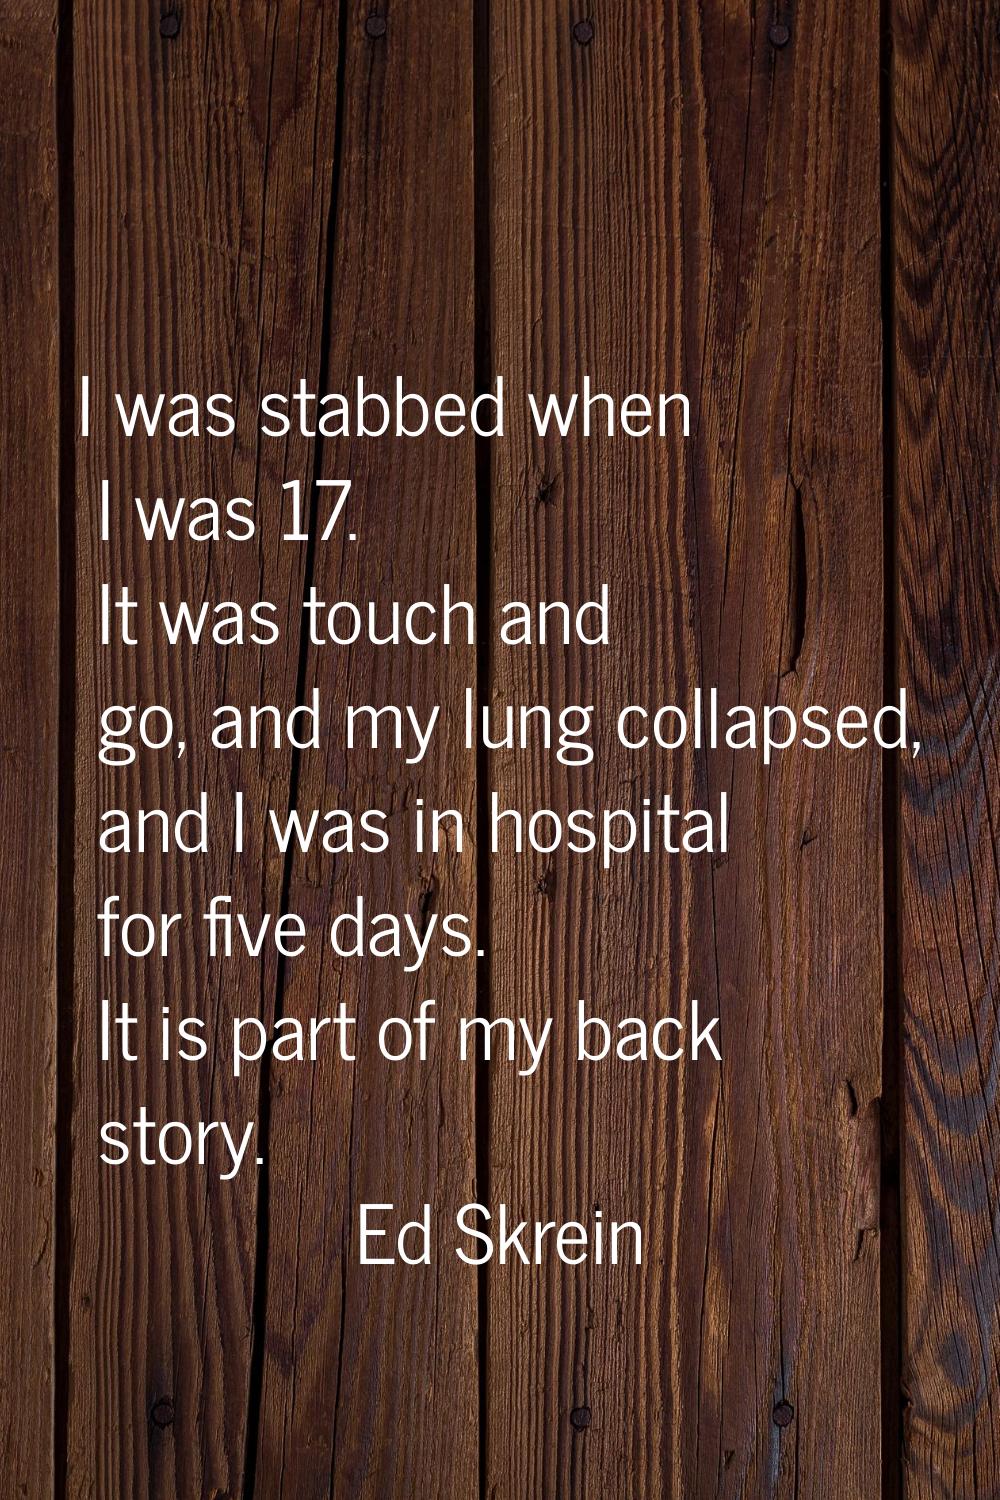 I was stabbed when I was 17. It was touch and go, and my lung collapsed, and I was in hospital for 